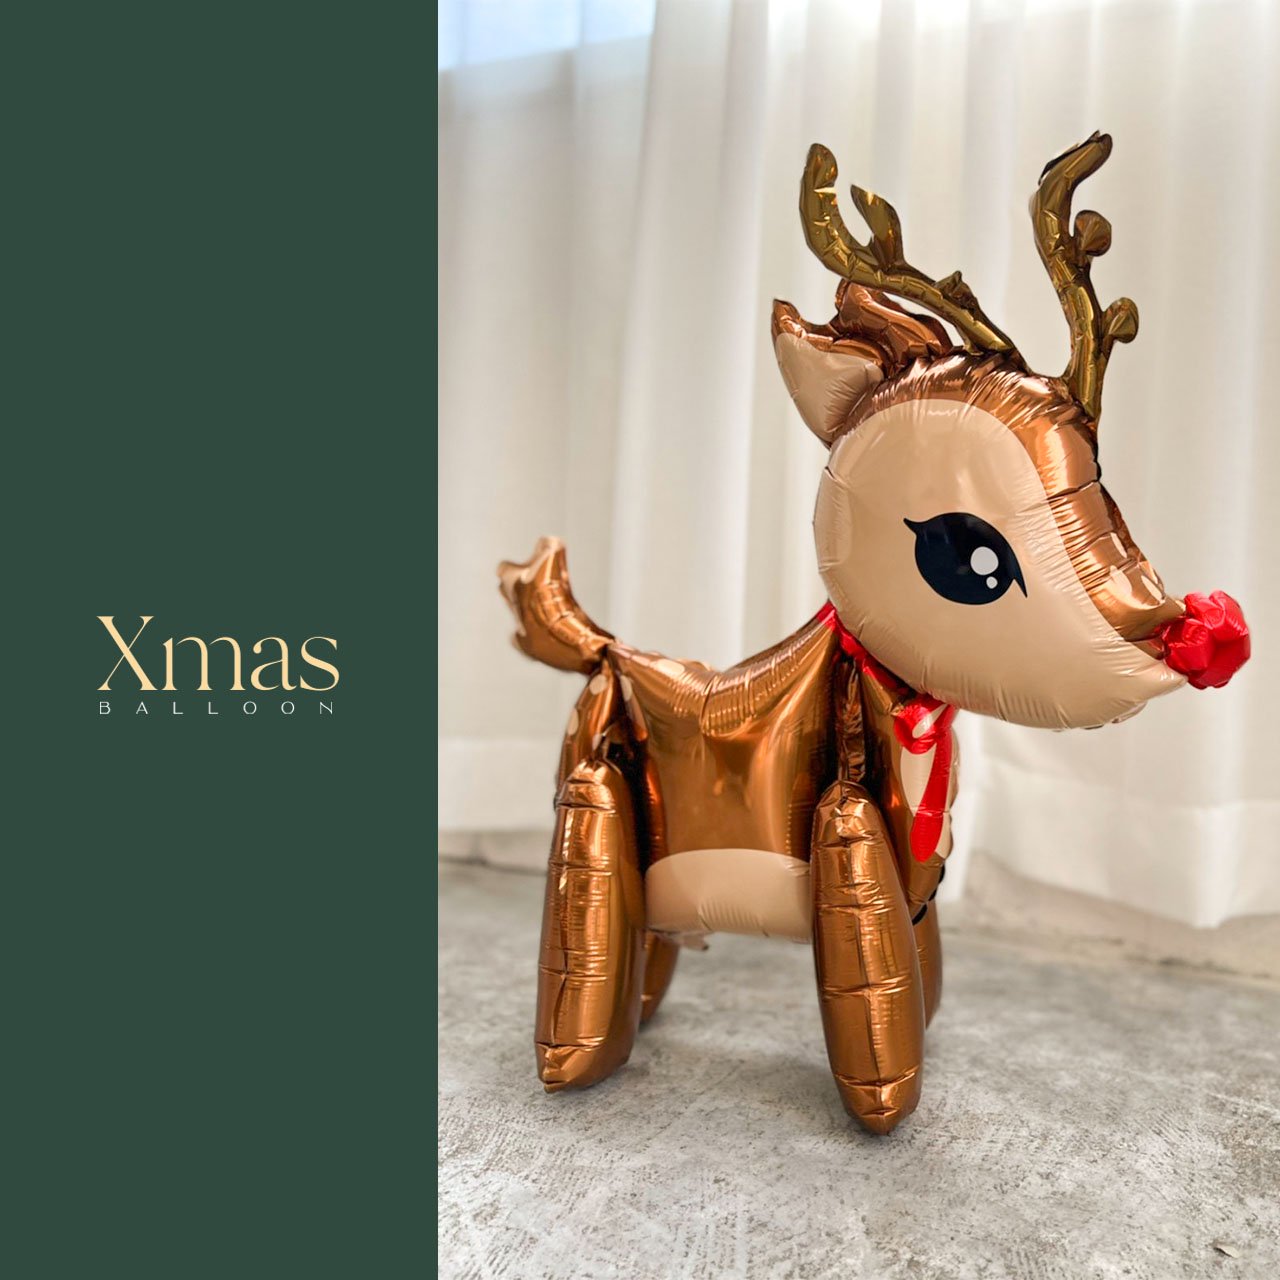 <img class='new_mark_img1' src='https://img.shop-pro.jp/img/new/icons23.gif' style='border:none;display:inline;margin:0px;padding:0px;width:auto;' />Reindeer Xmas Balloon - トナカイお散歩バルーン - クリスマスバルーン飾り付け&プレゼント